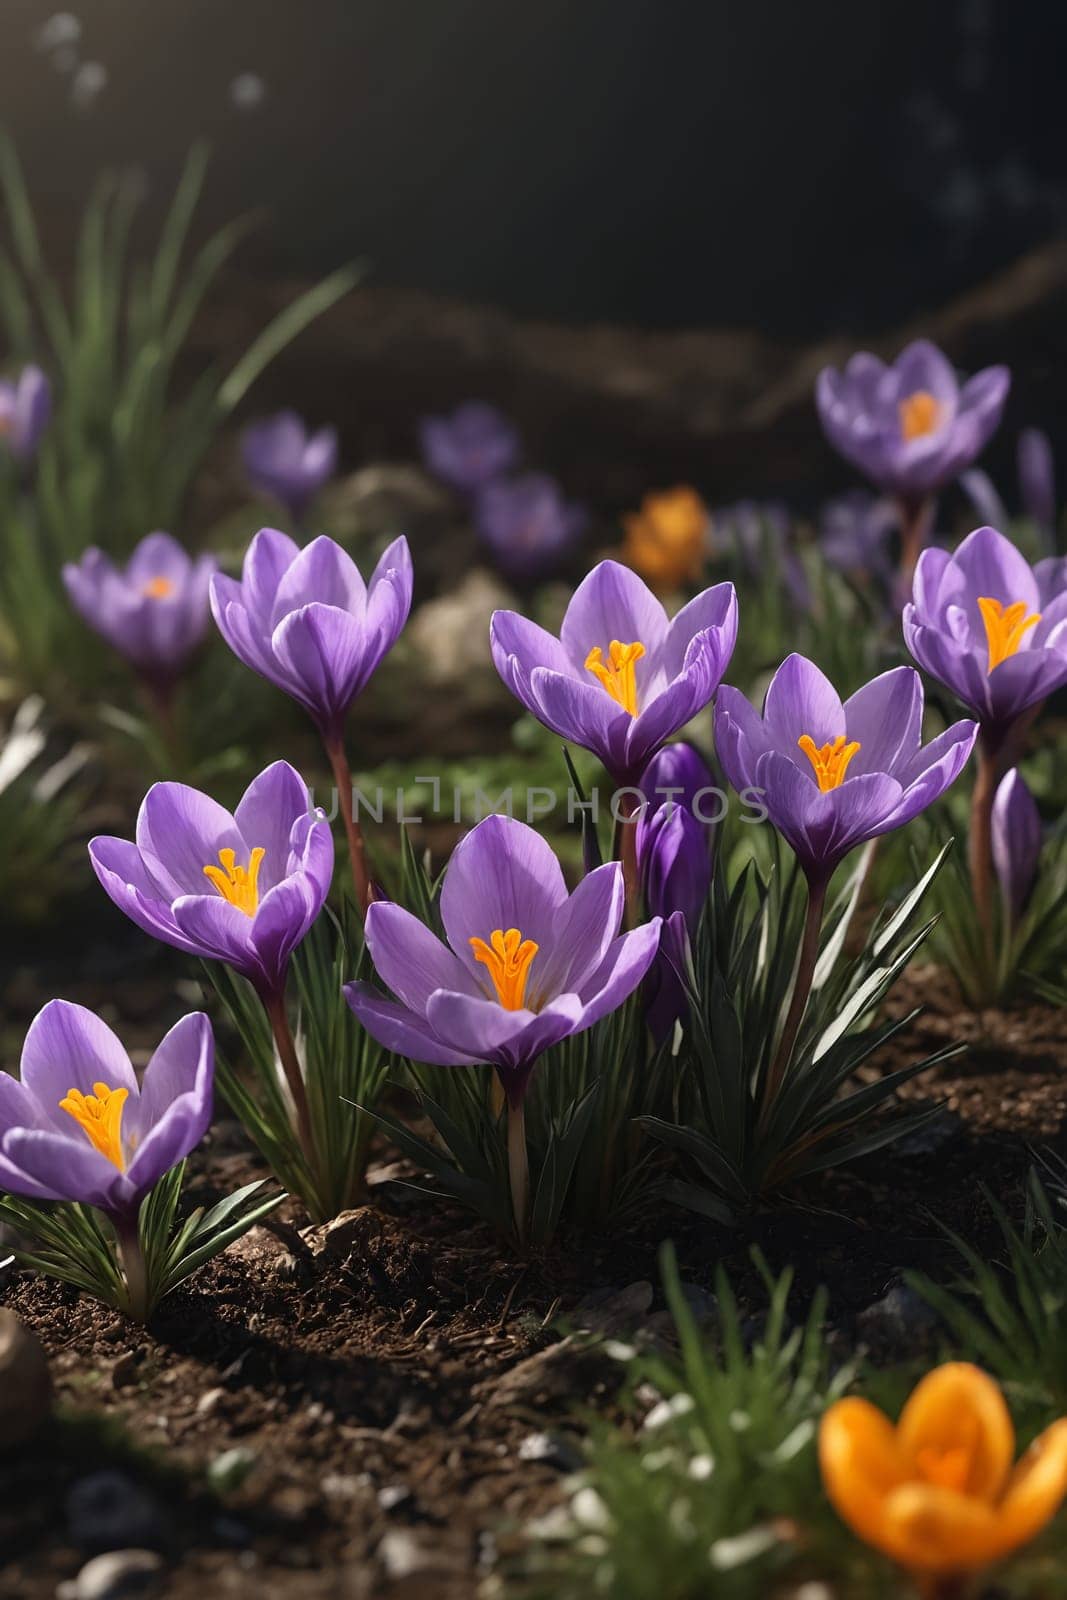 This image showcases the vibrant colors of crocuses announcing the arrival of spring. Perfect for use in garden blogs or seasonal nature articles.